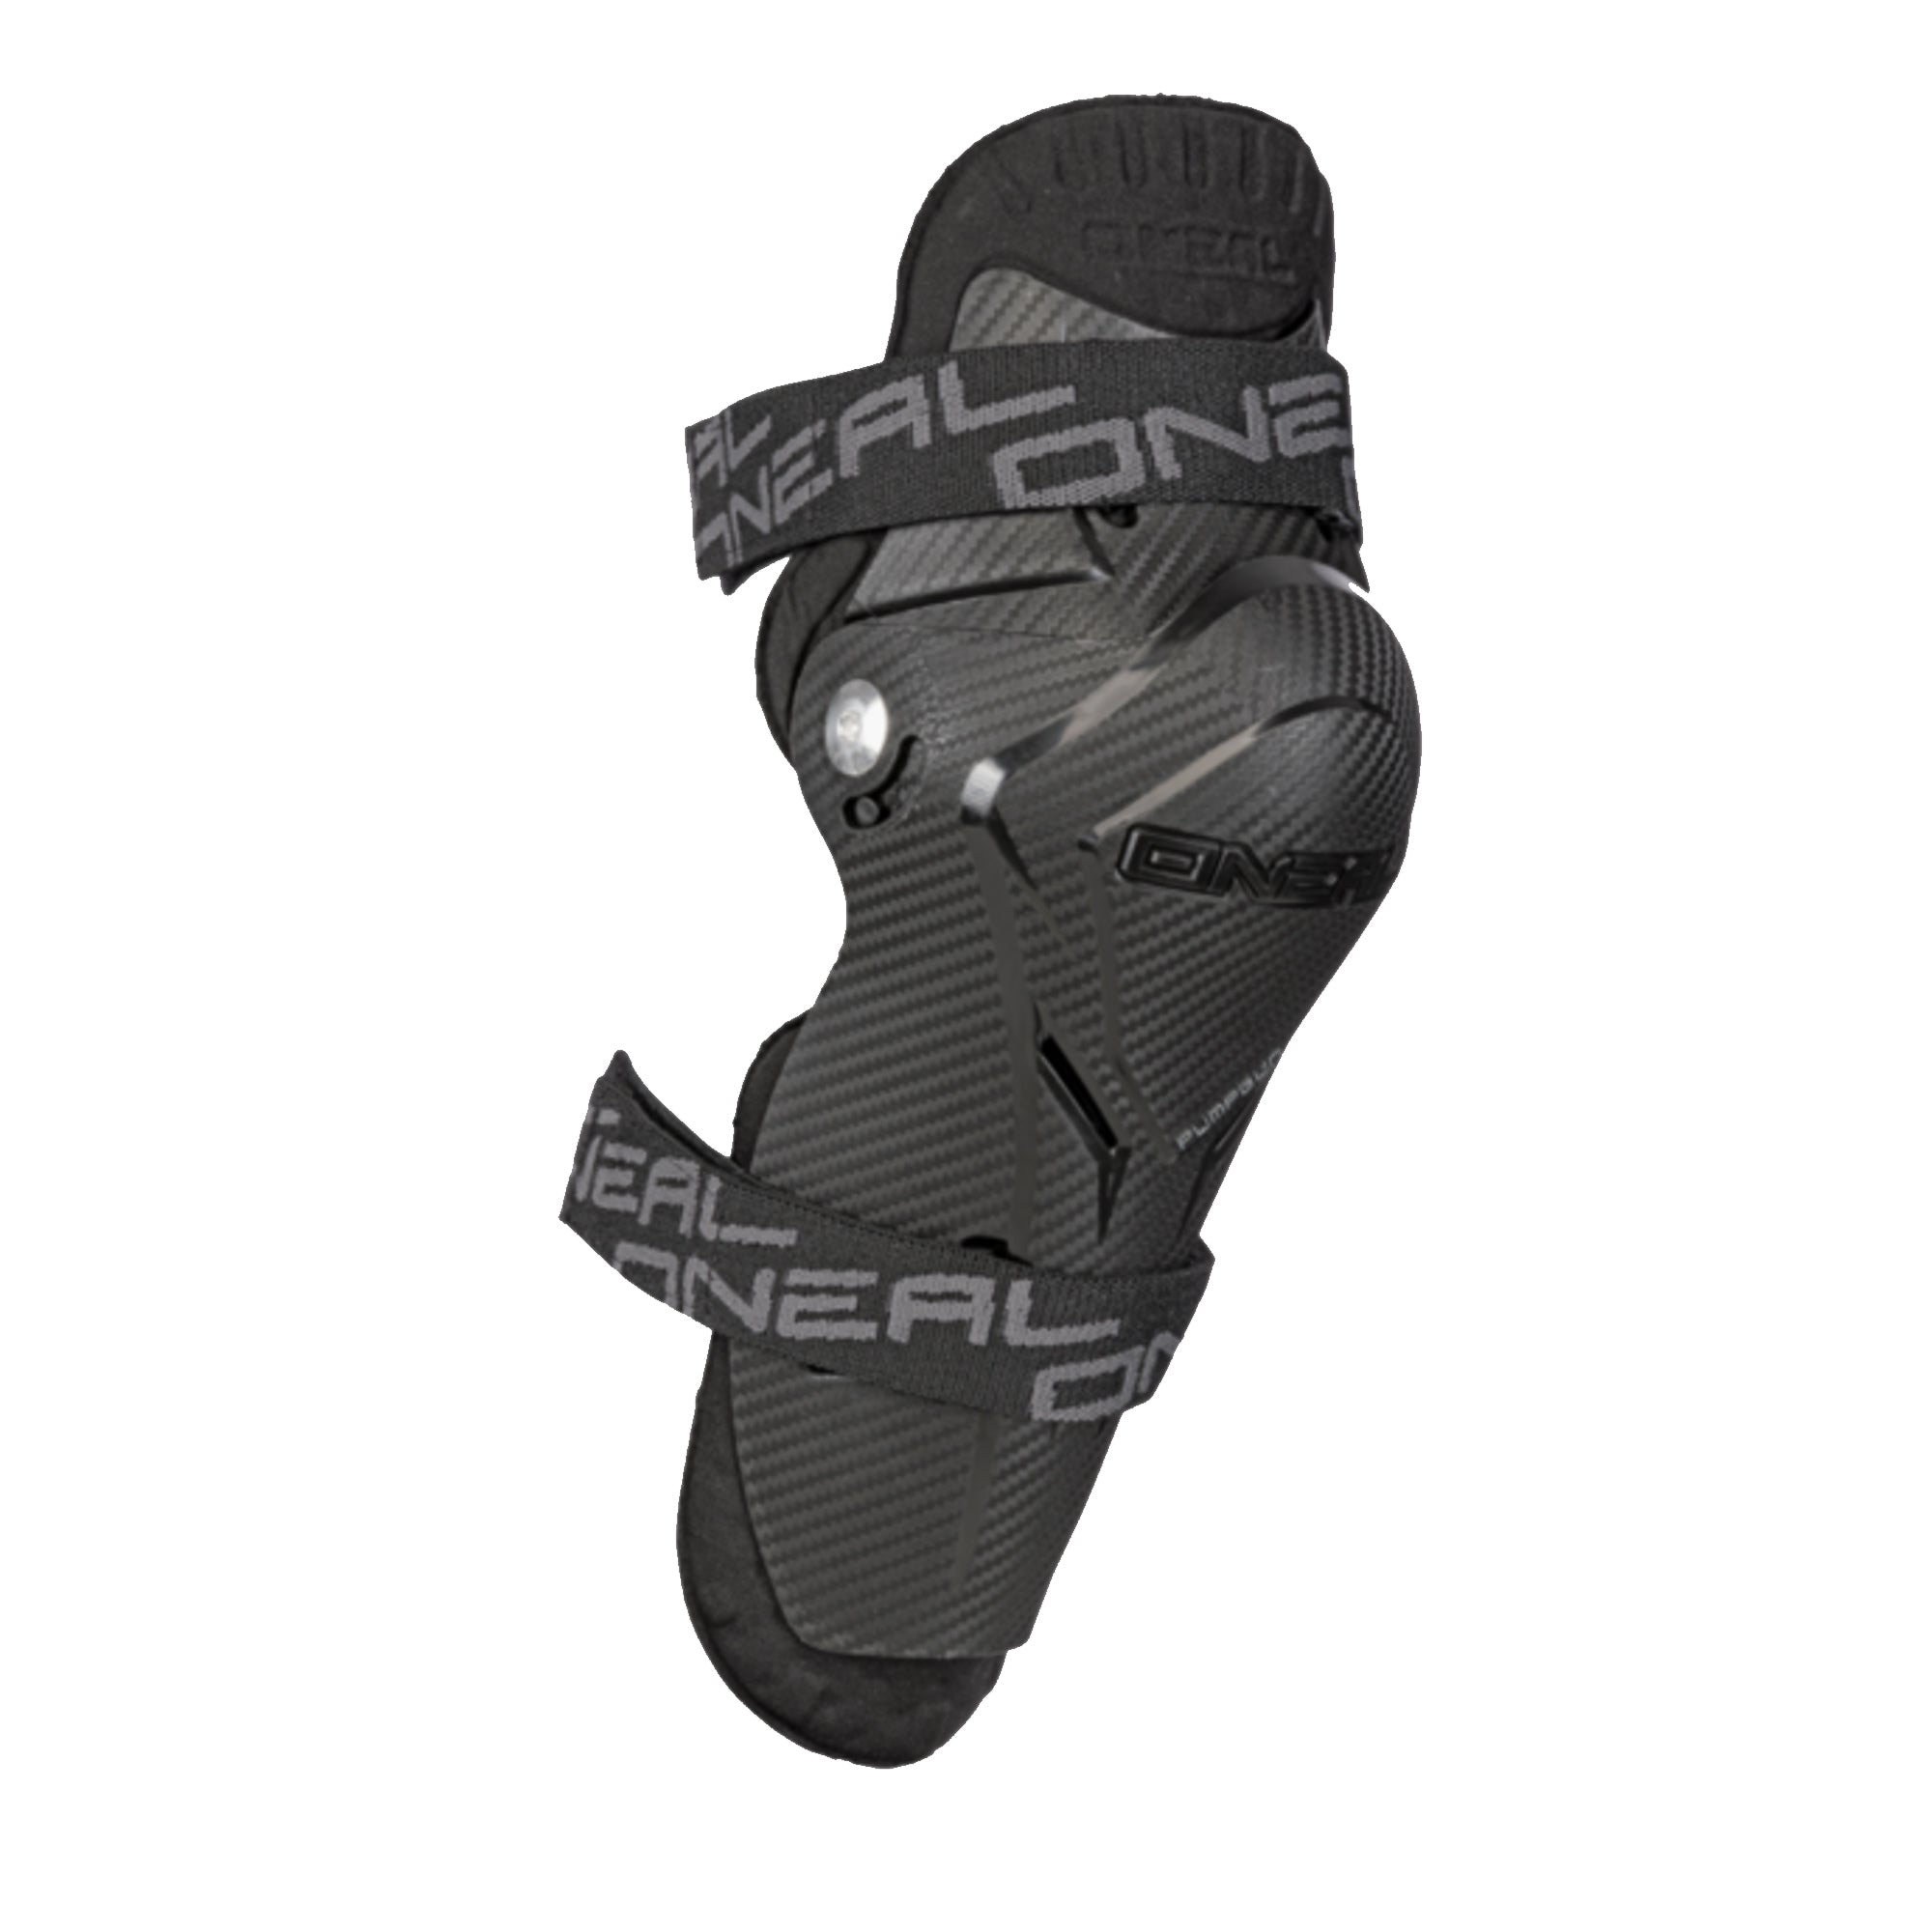 GENOUILLERES MOTO ENFANT KTM SX-1 YOUTH KNEE PROTECTOR BY